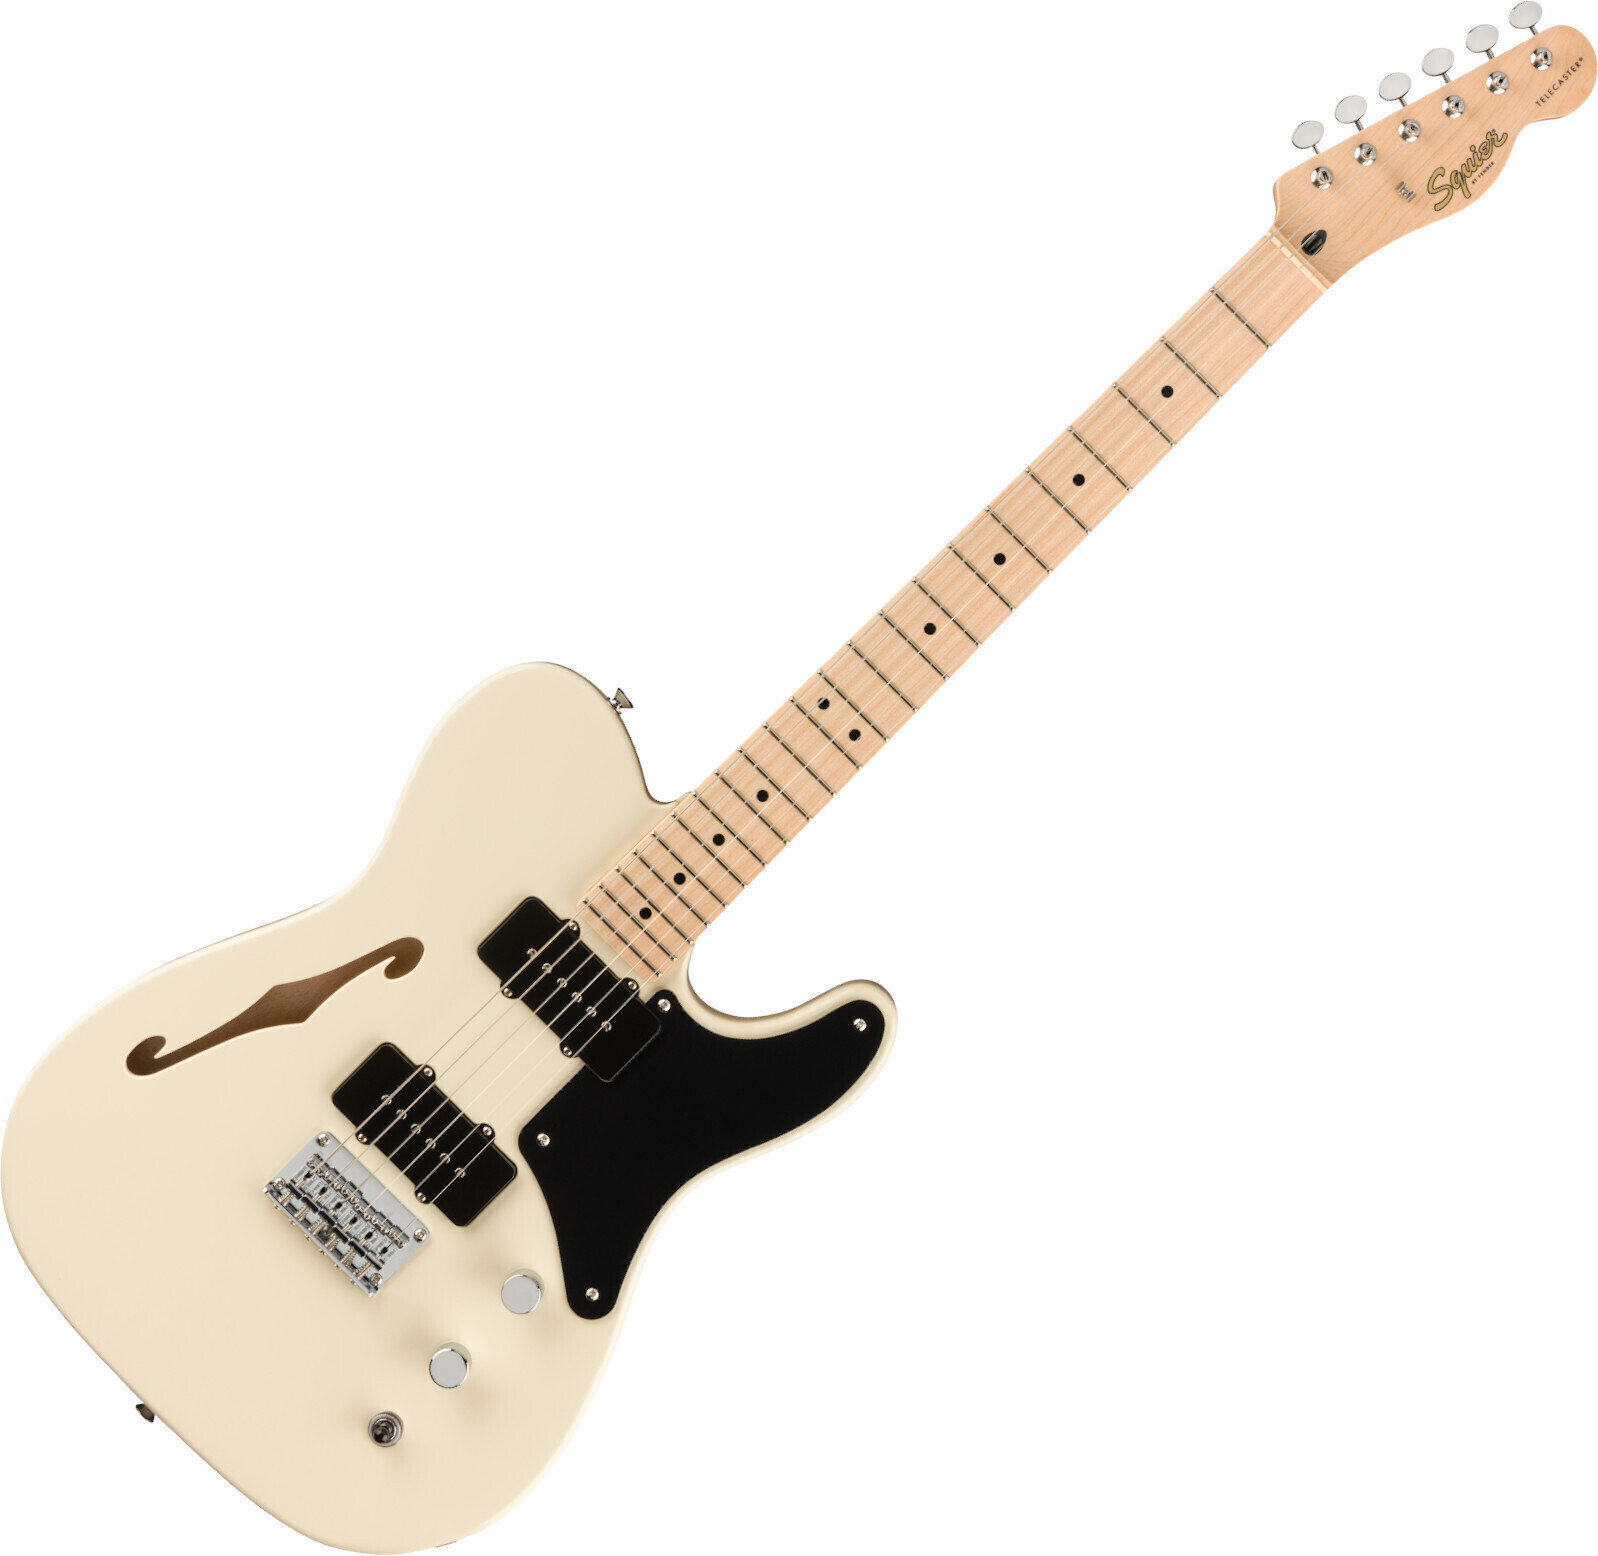 Fender Squier Paranormal Cabronita Telecaster Thinline MN Olympic White Fender Squier